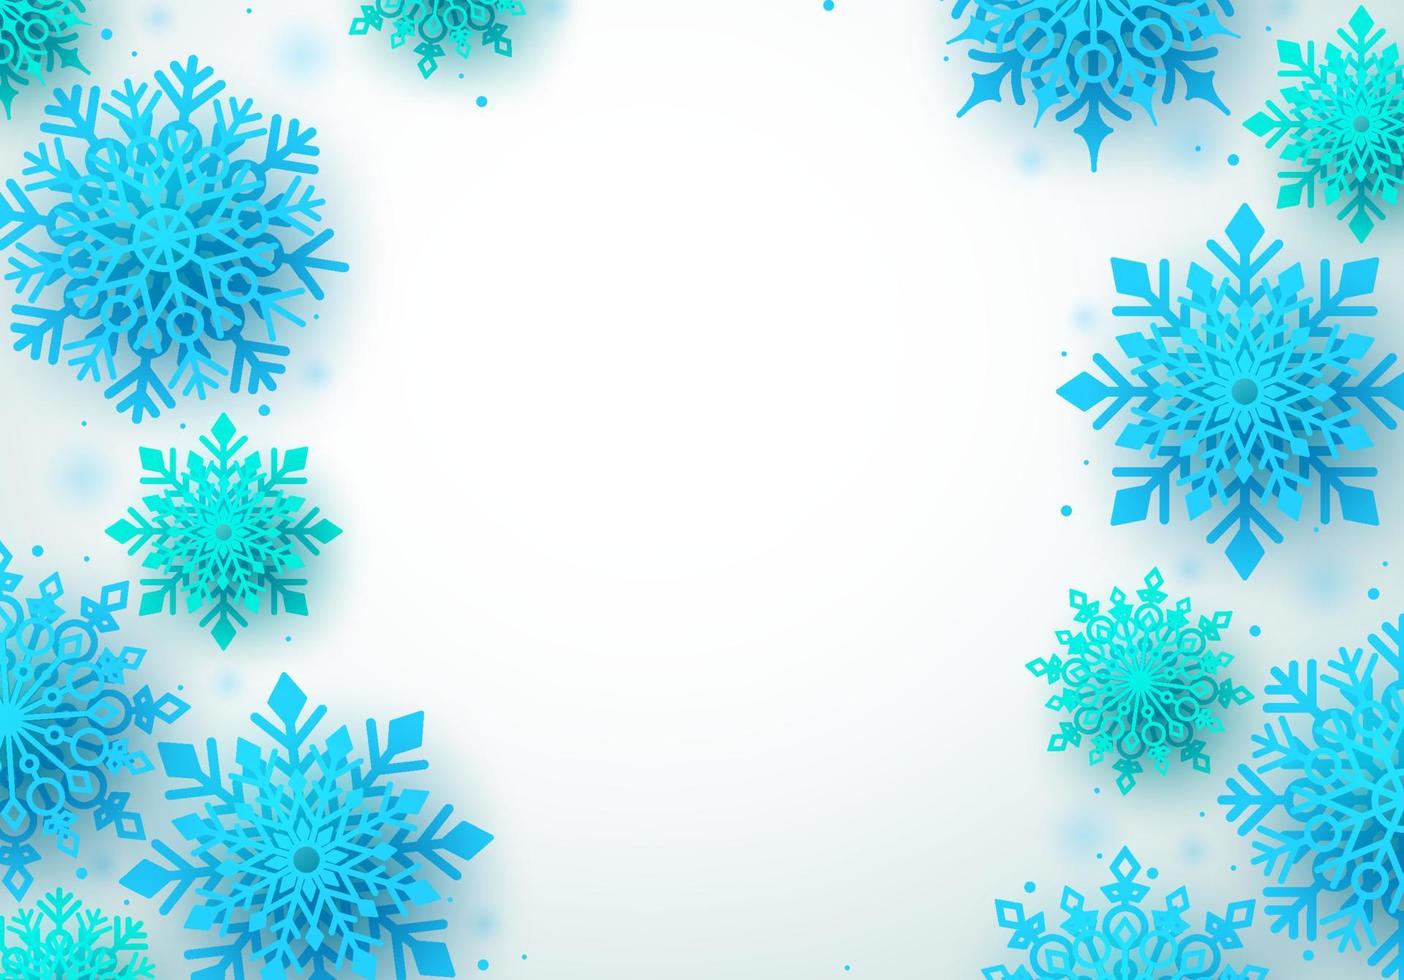 Winter snowflakes vector background. White winter background with blue snowflakes and empty white space for text. Vector illustration.